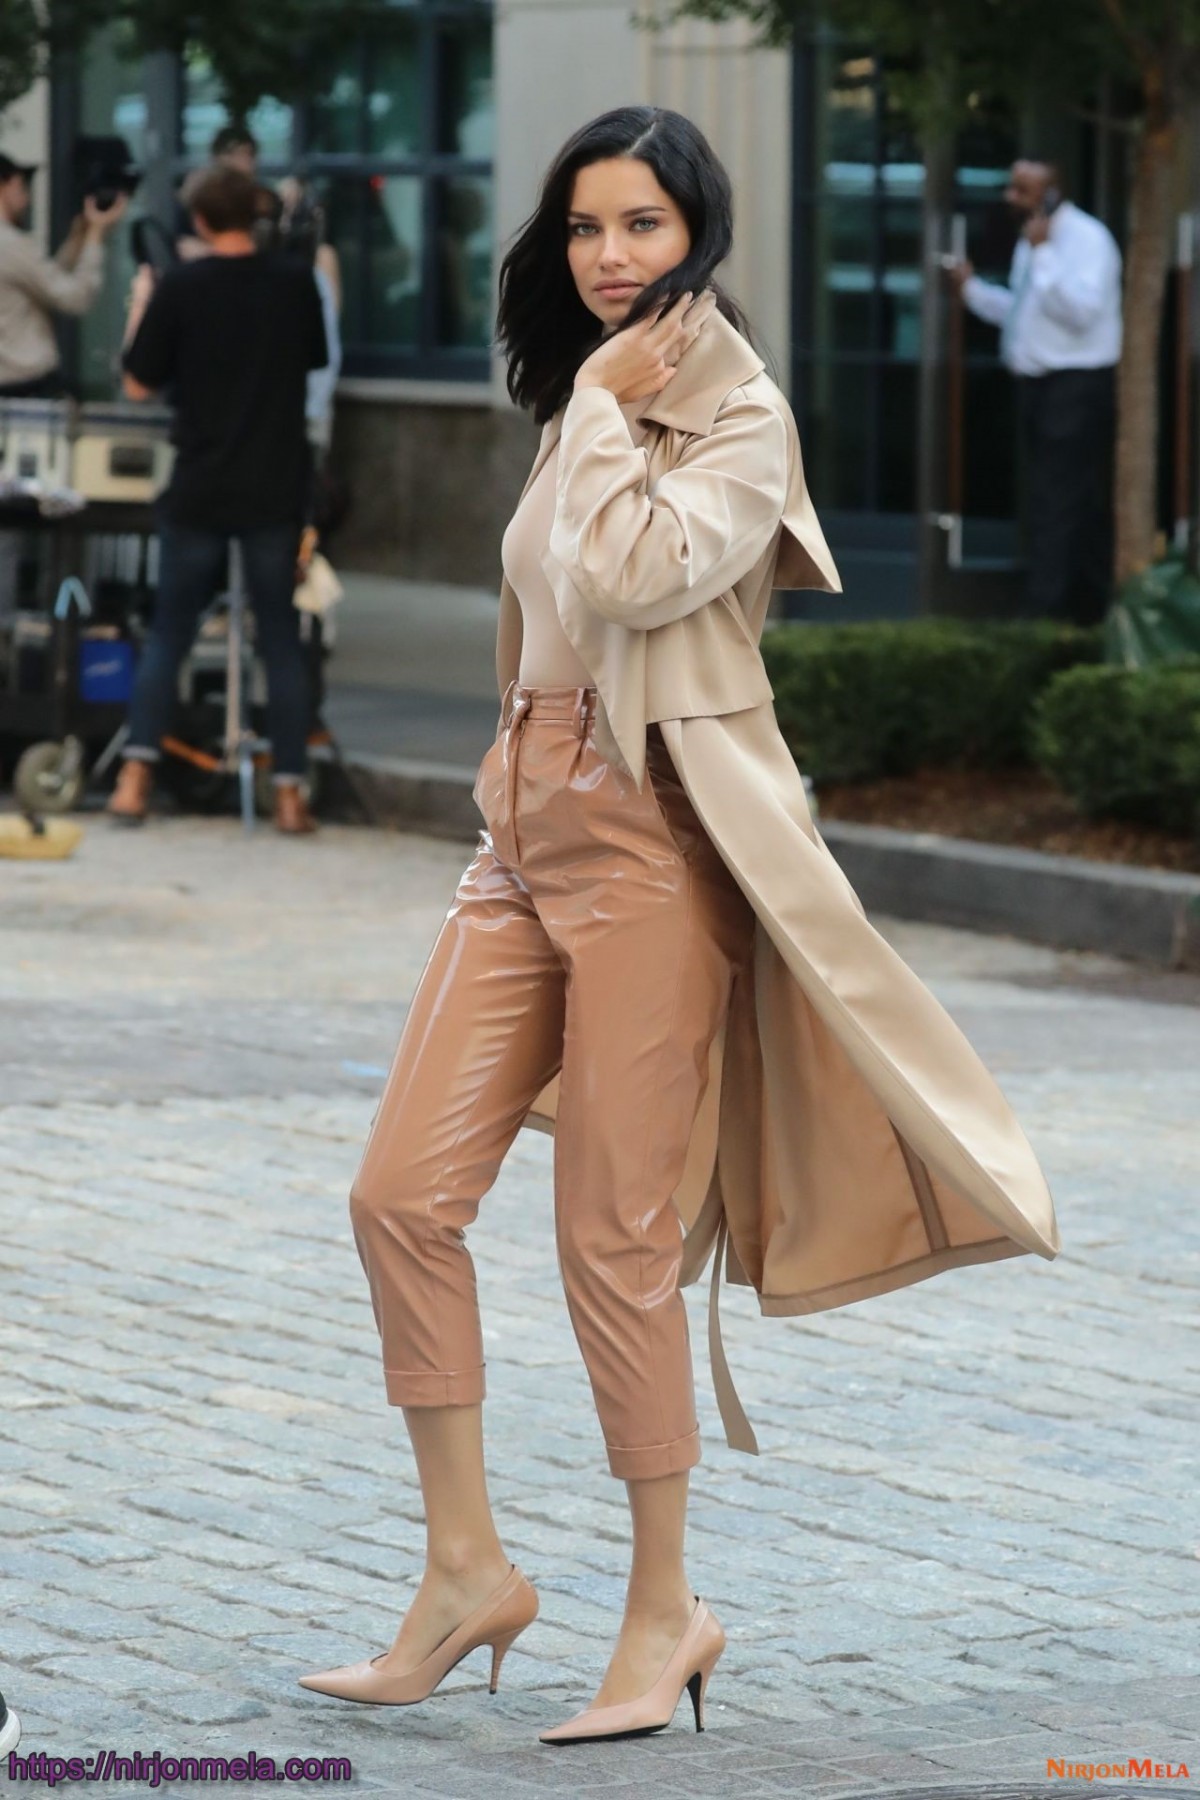 adriana-lima-in-a-beige-colored-ensemble-in-nyc-10-04-2018-0.jpg